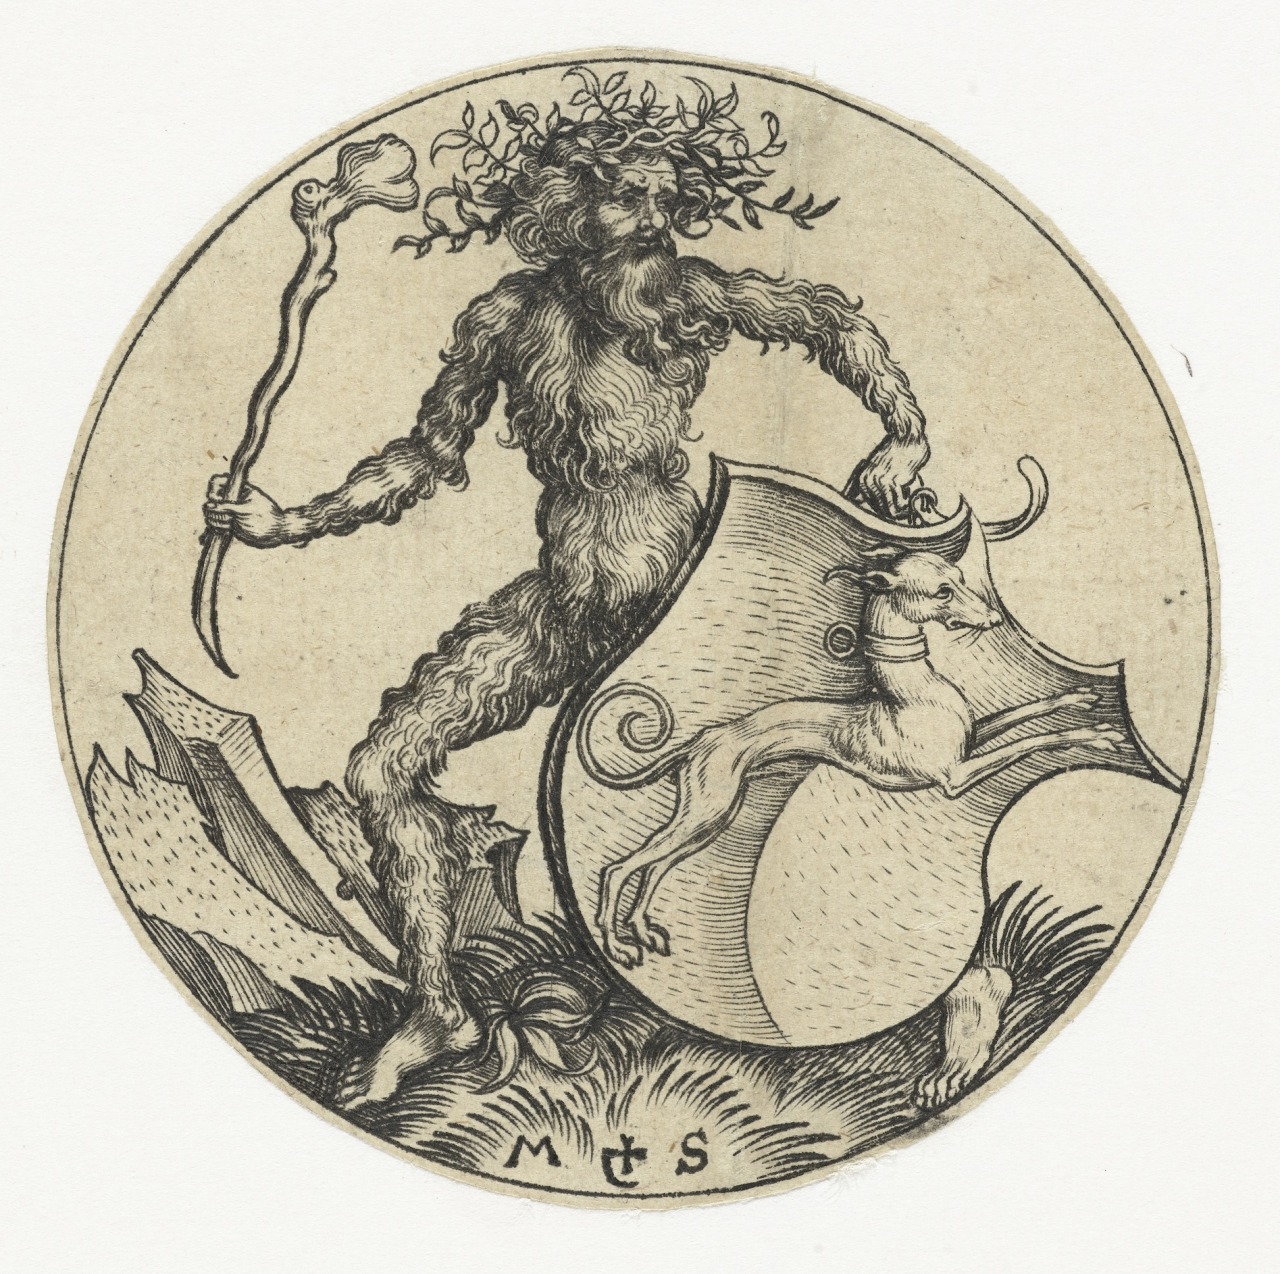 Martin-Schongauer-Coat-of-arms-with-a-Dog-Held-by-a-Woodwose-with-a-Club.